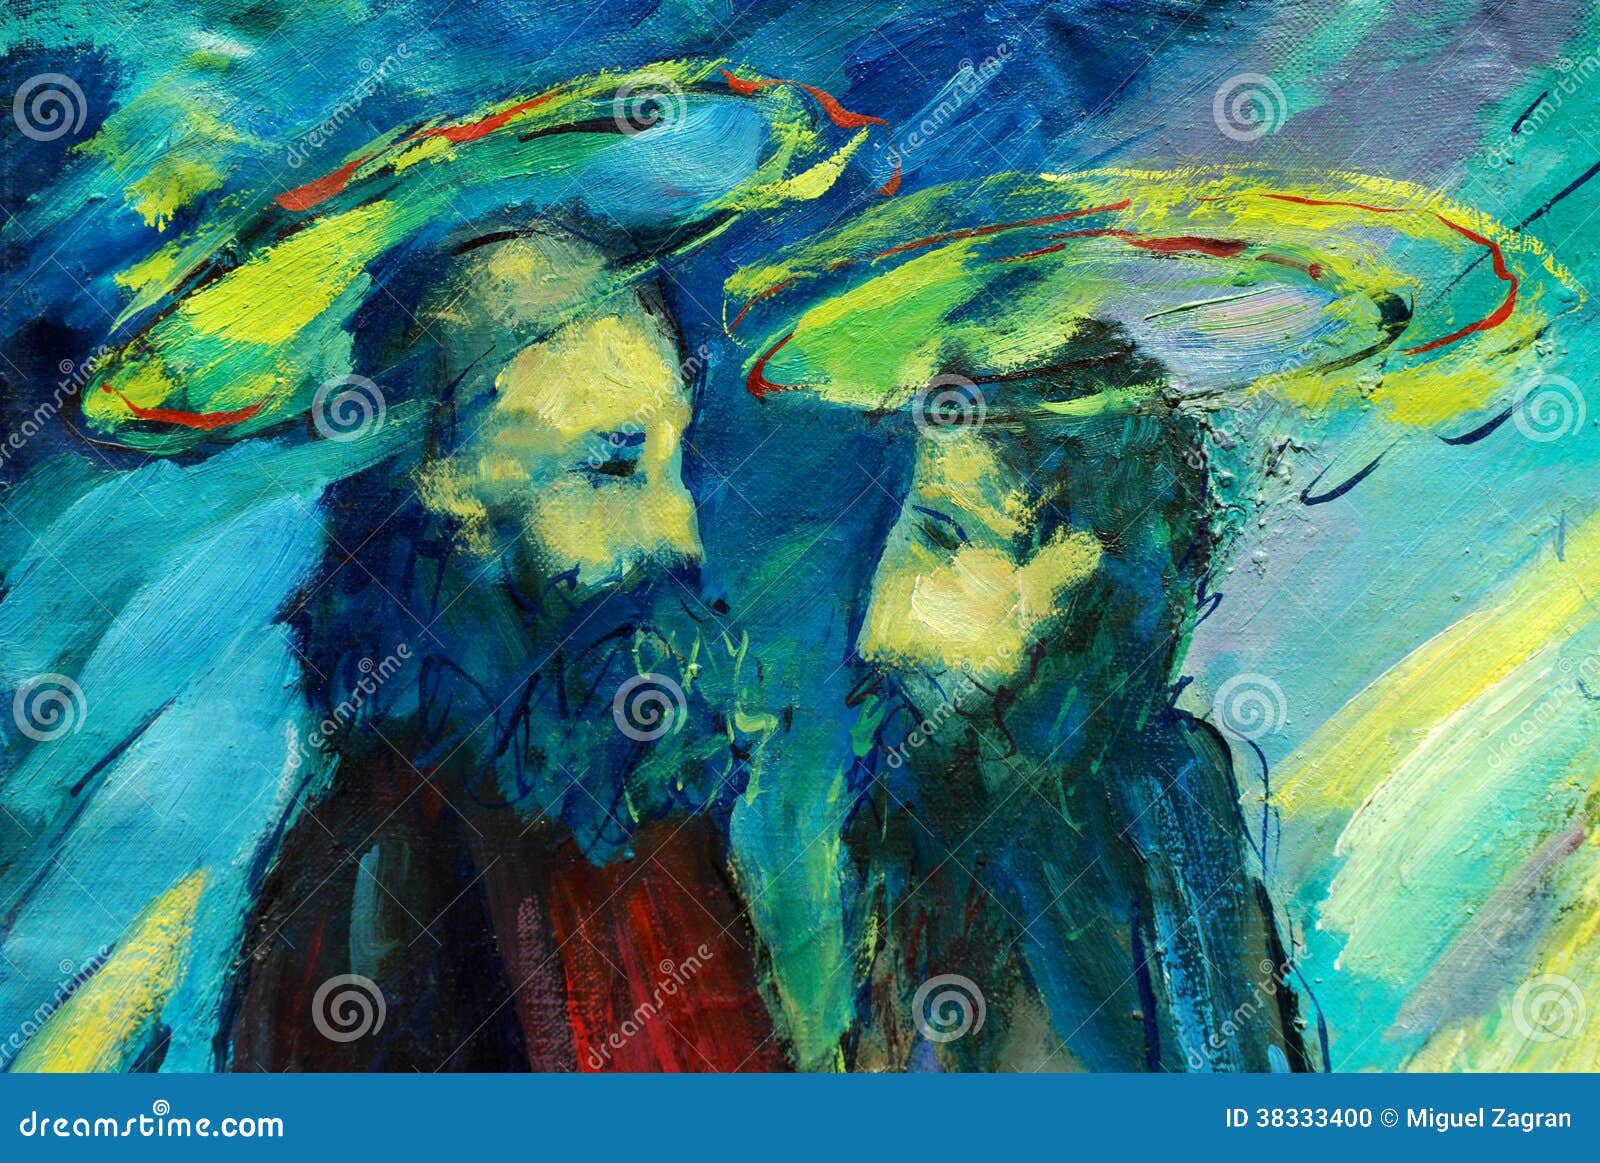 bible apostles peter and paul, , painting by oil on